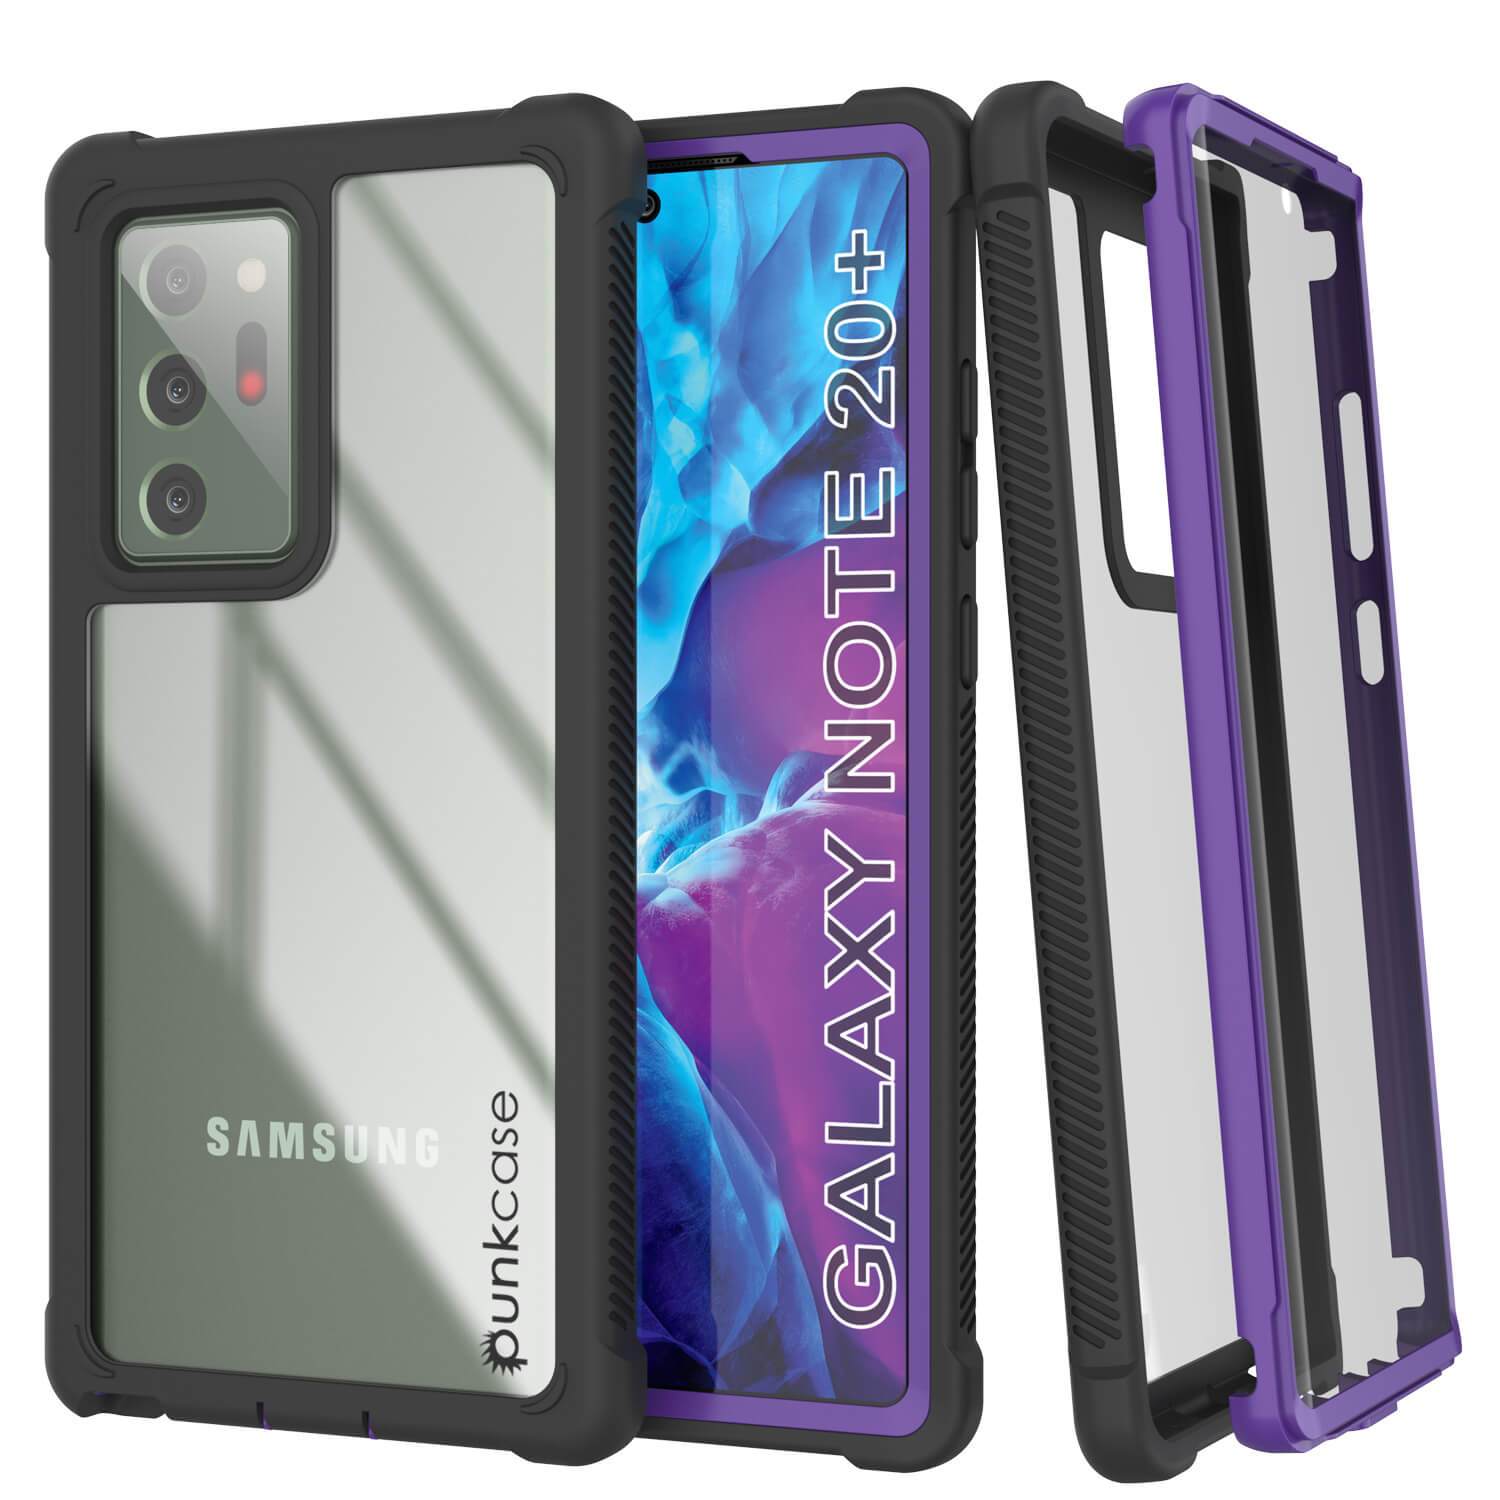 Punkcase Galaxy Note 20 Ultra Case, [Spartan Series] Purple Rugged Heavy Duty Cover W/Built in Screen Protector